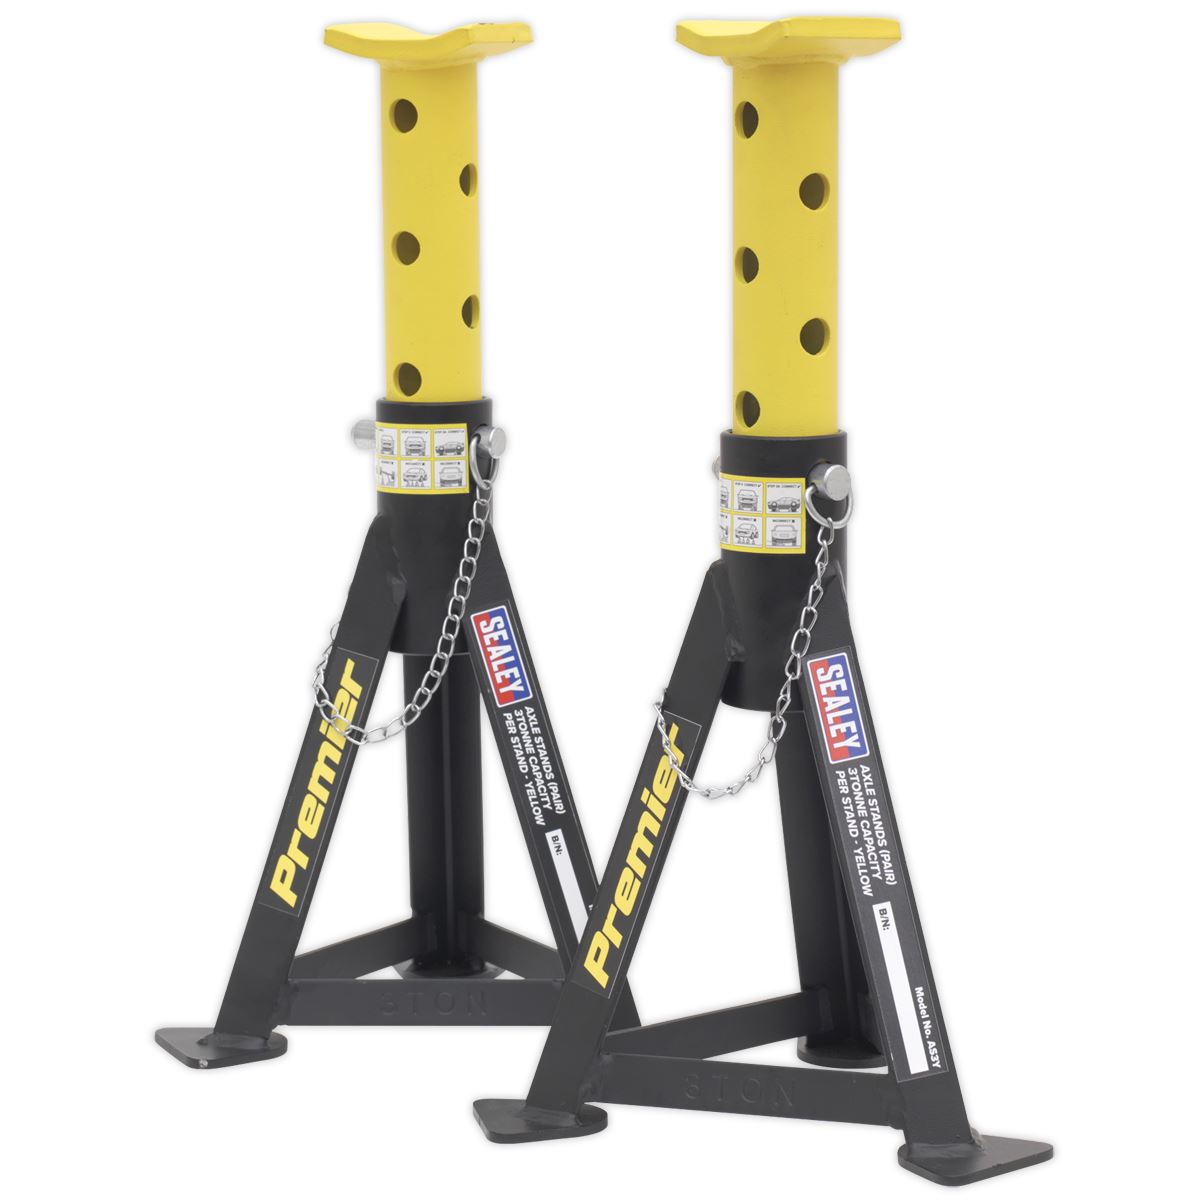 Sealey Premier Axle Stands (Pair) 3 Tonne Capacity per Stand - Yellow